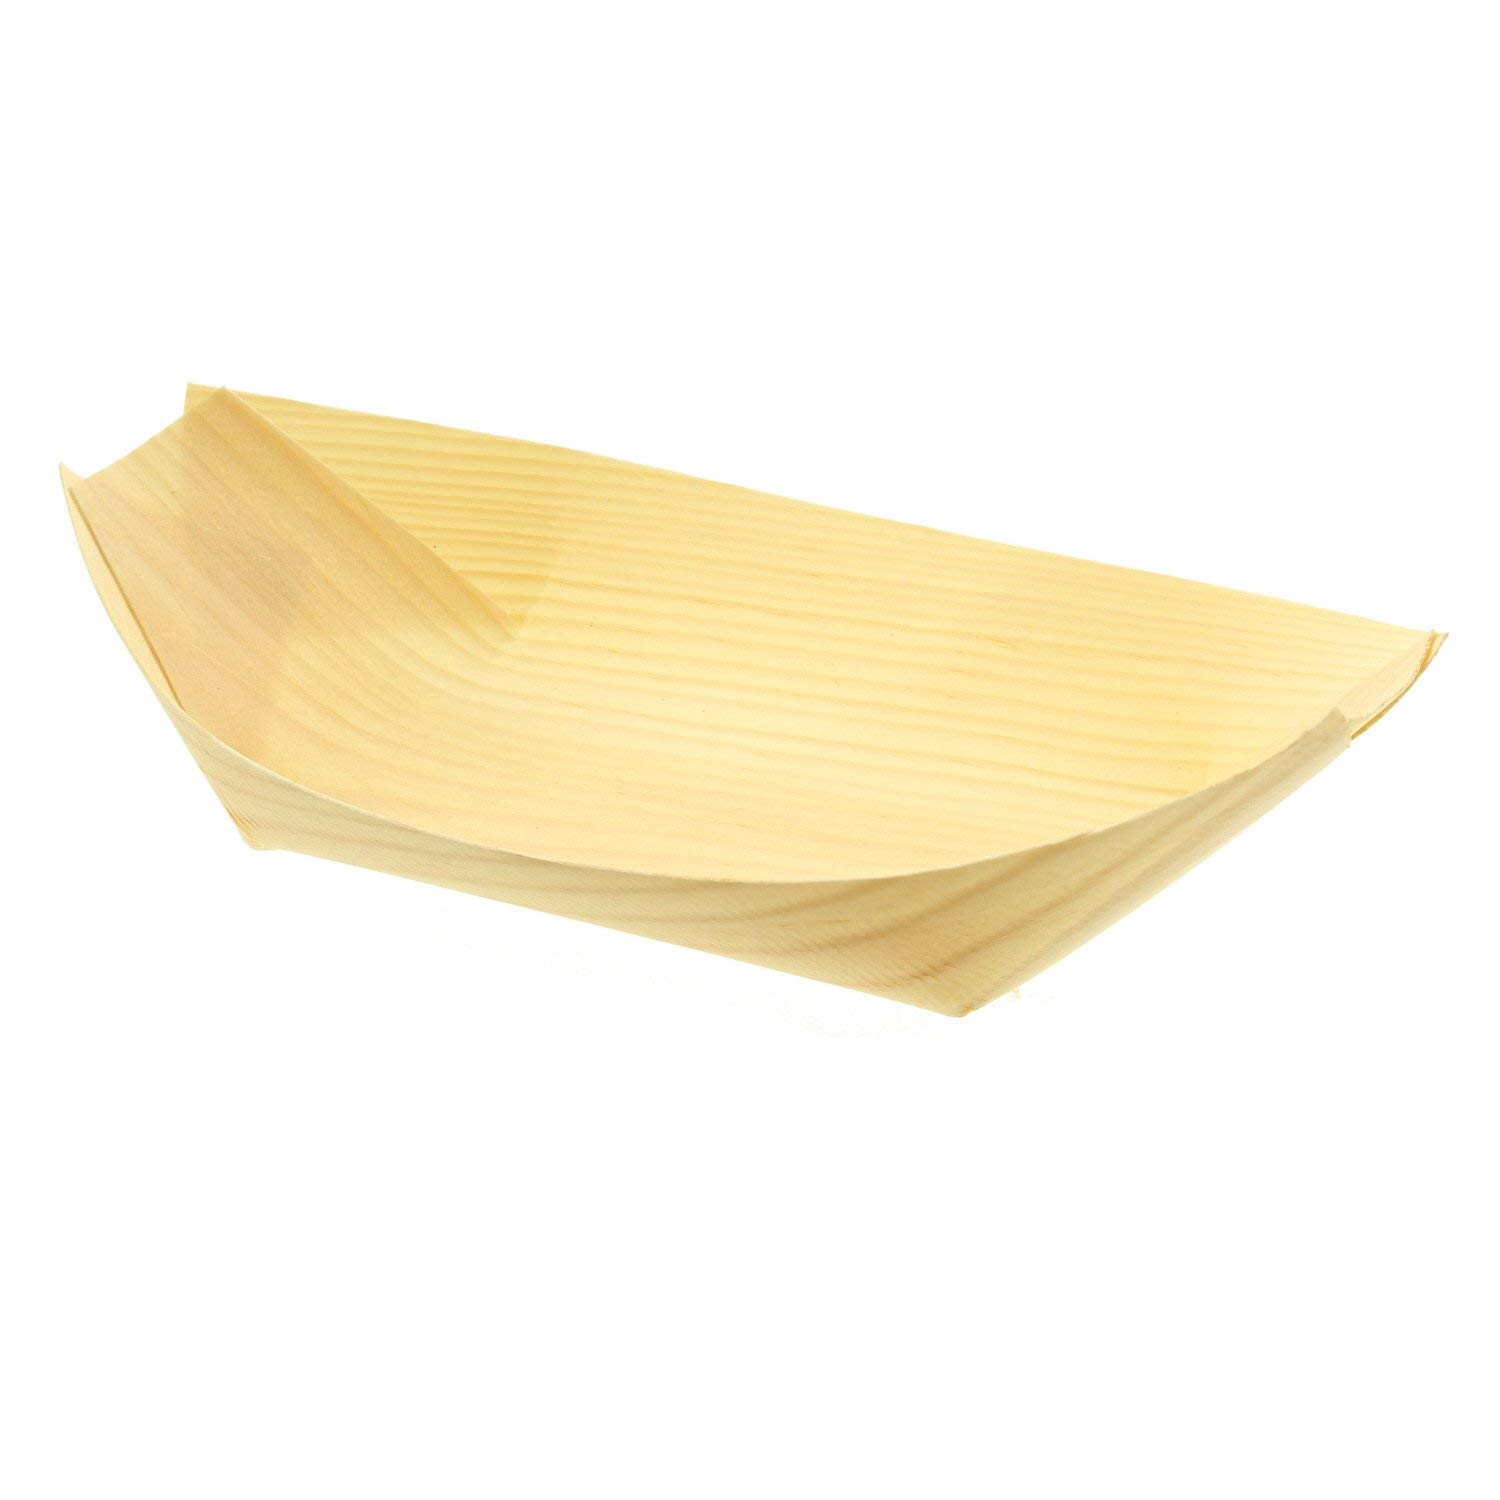 Produce Wood Serving Boat